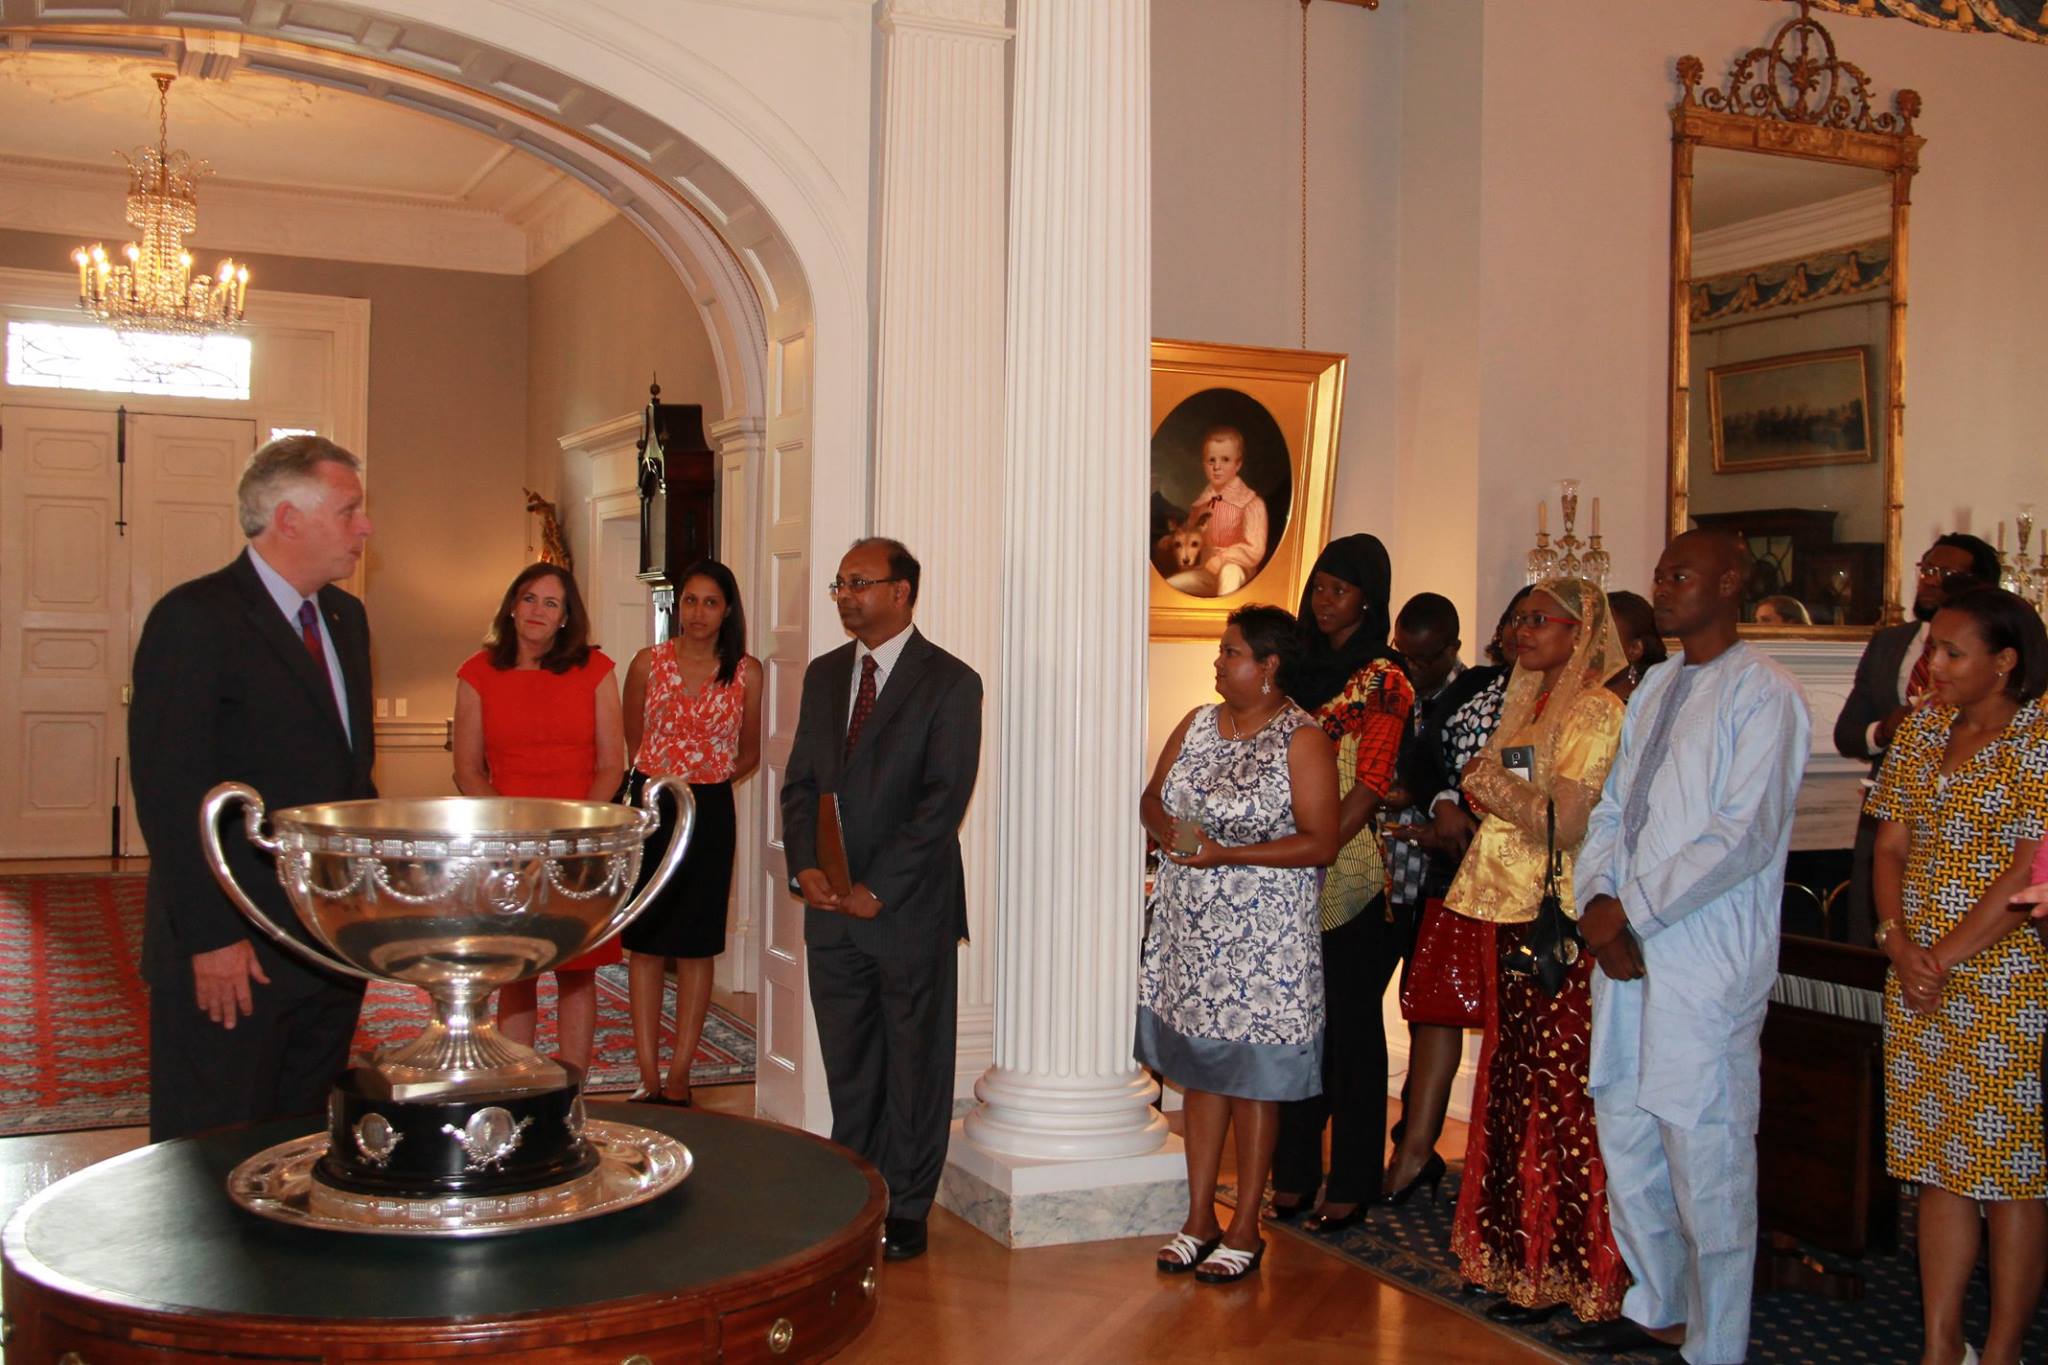 Gov. Terry McAuliffe and First Lady Dorothy McAuliffe recognize Dean Verma during a special reception for the 2015 Mandela Washington Fellows on June 30.